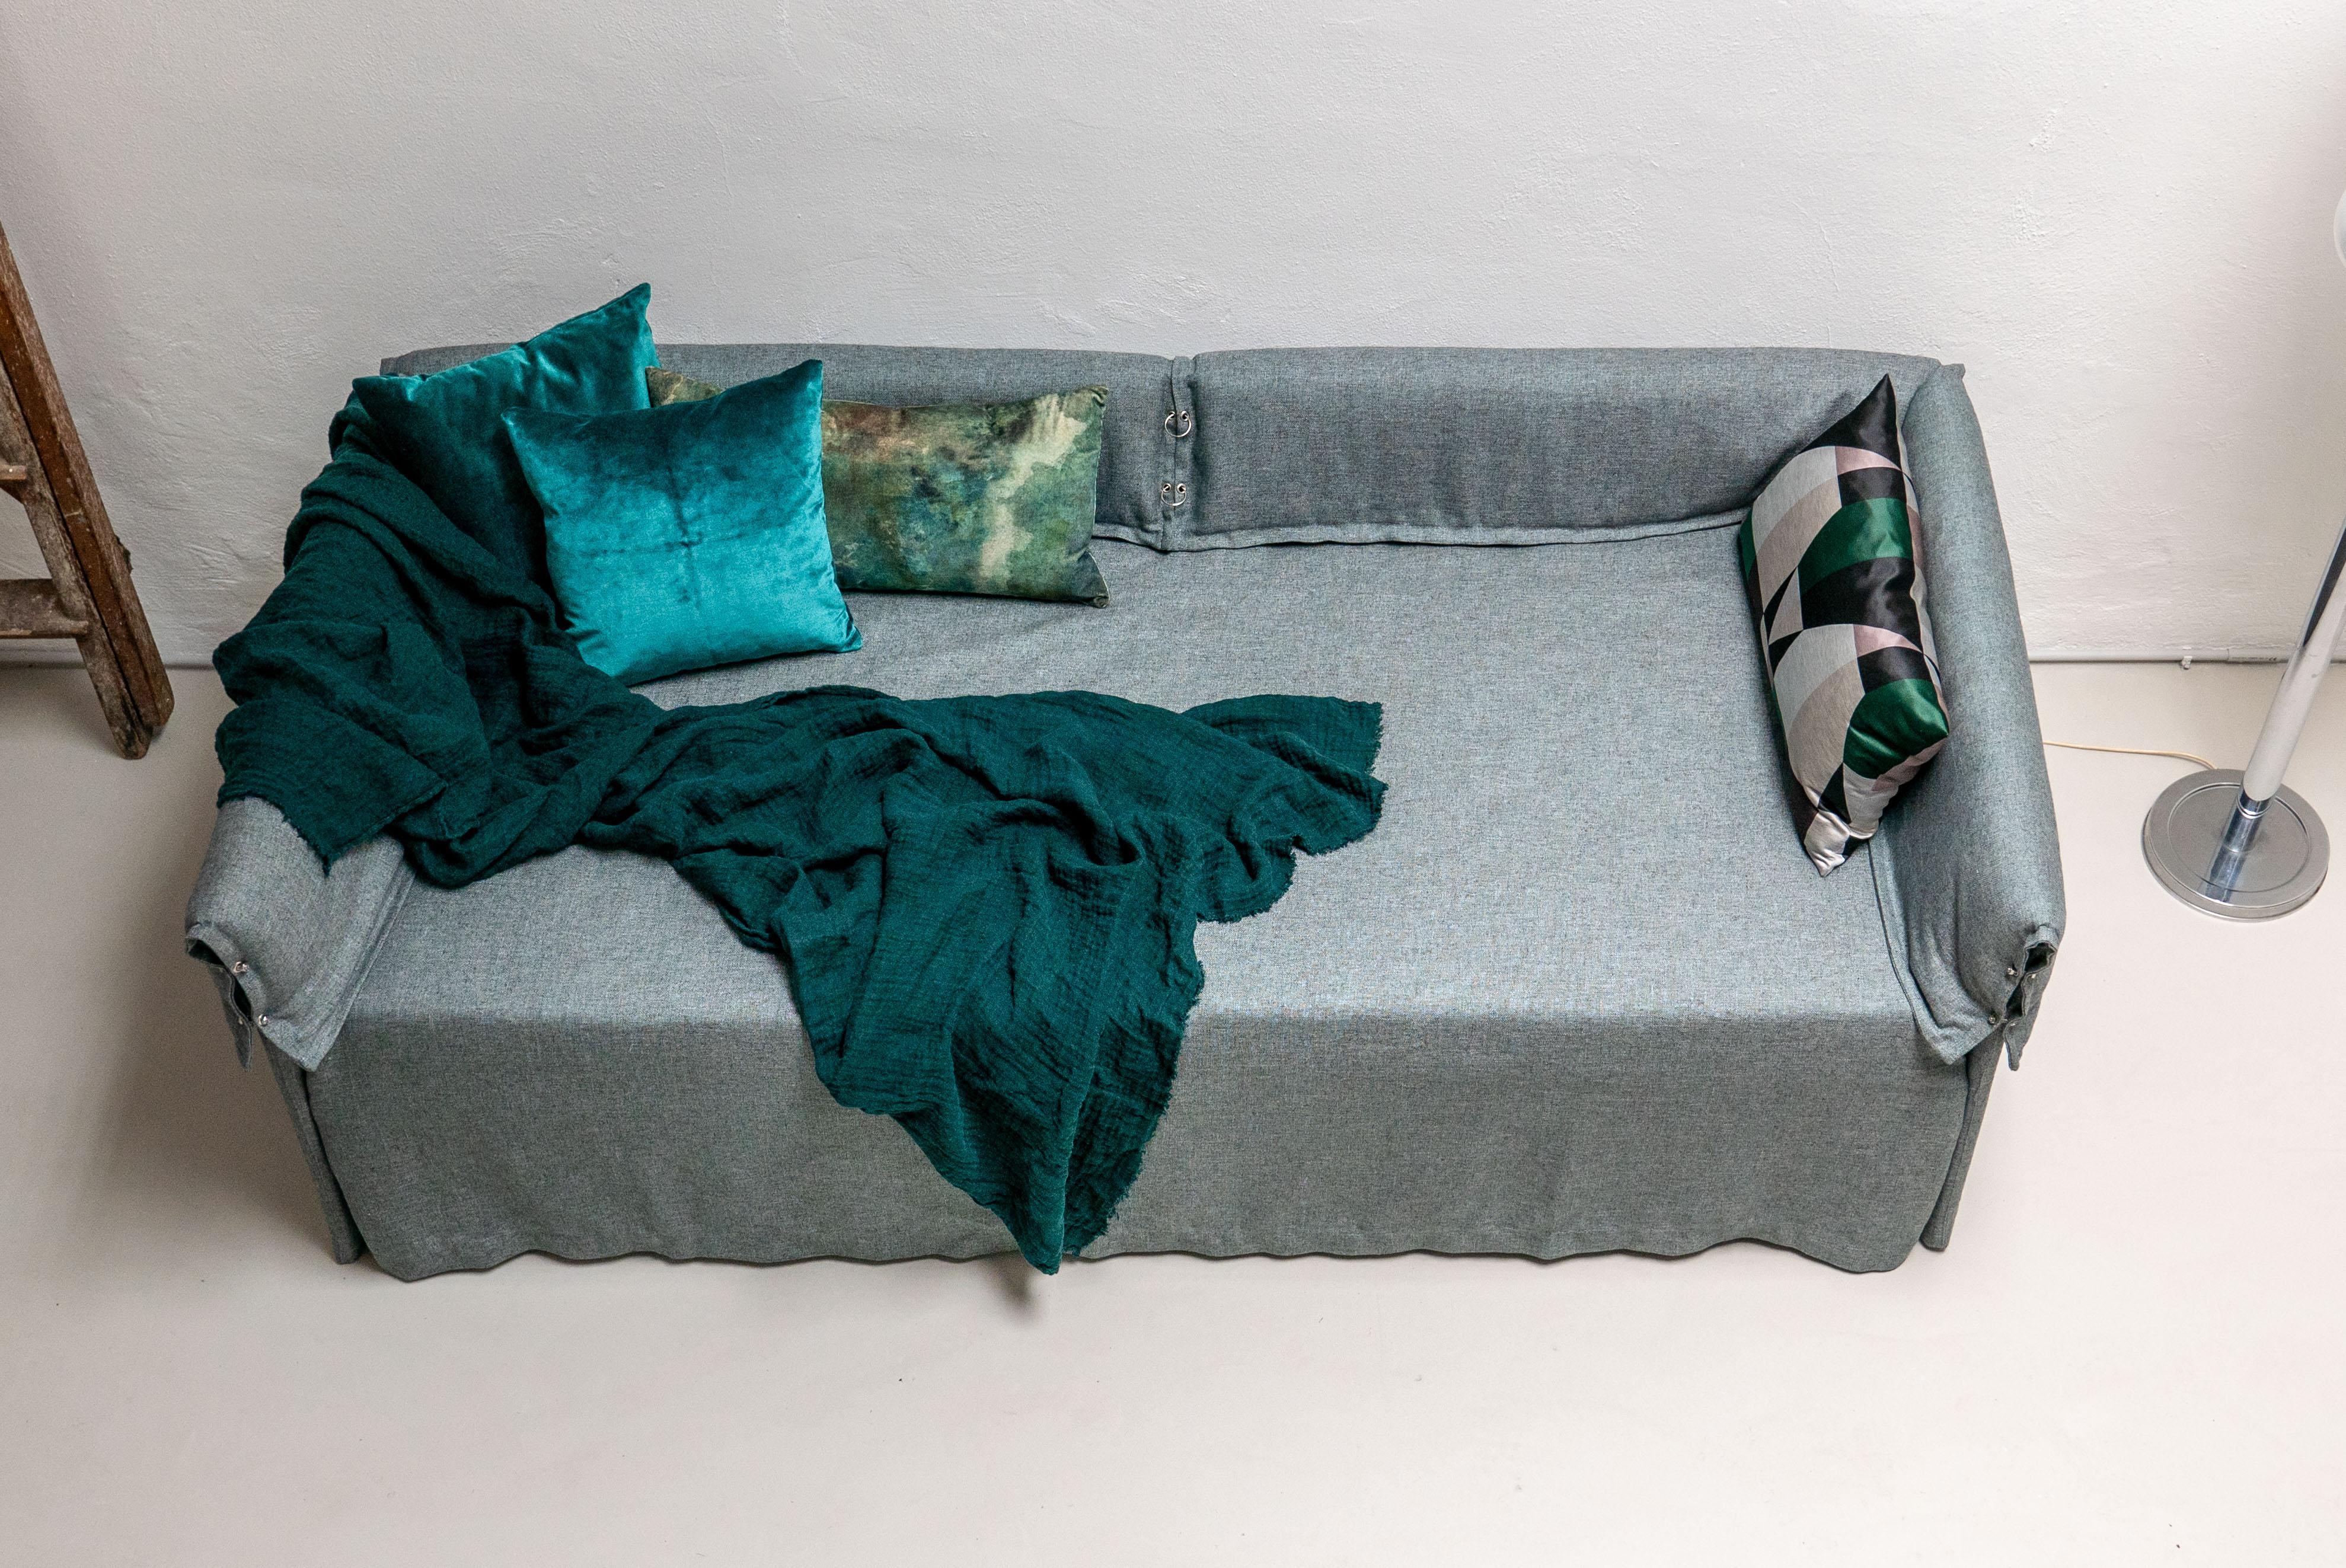 Contemporary Italian Sofa Bed by Spinzi, Green Fabric Upholstery, Bolts Details In Excellent Condition For Sale In Milano, IT